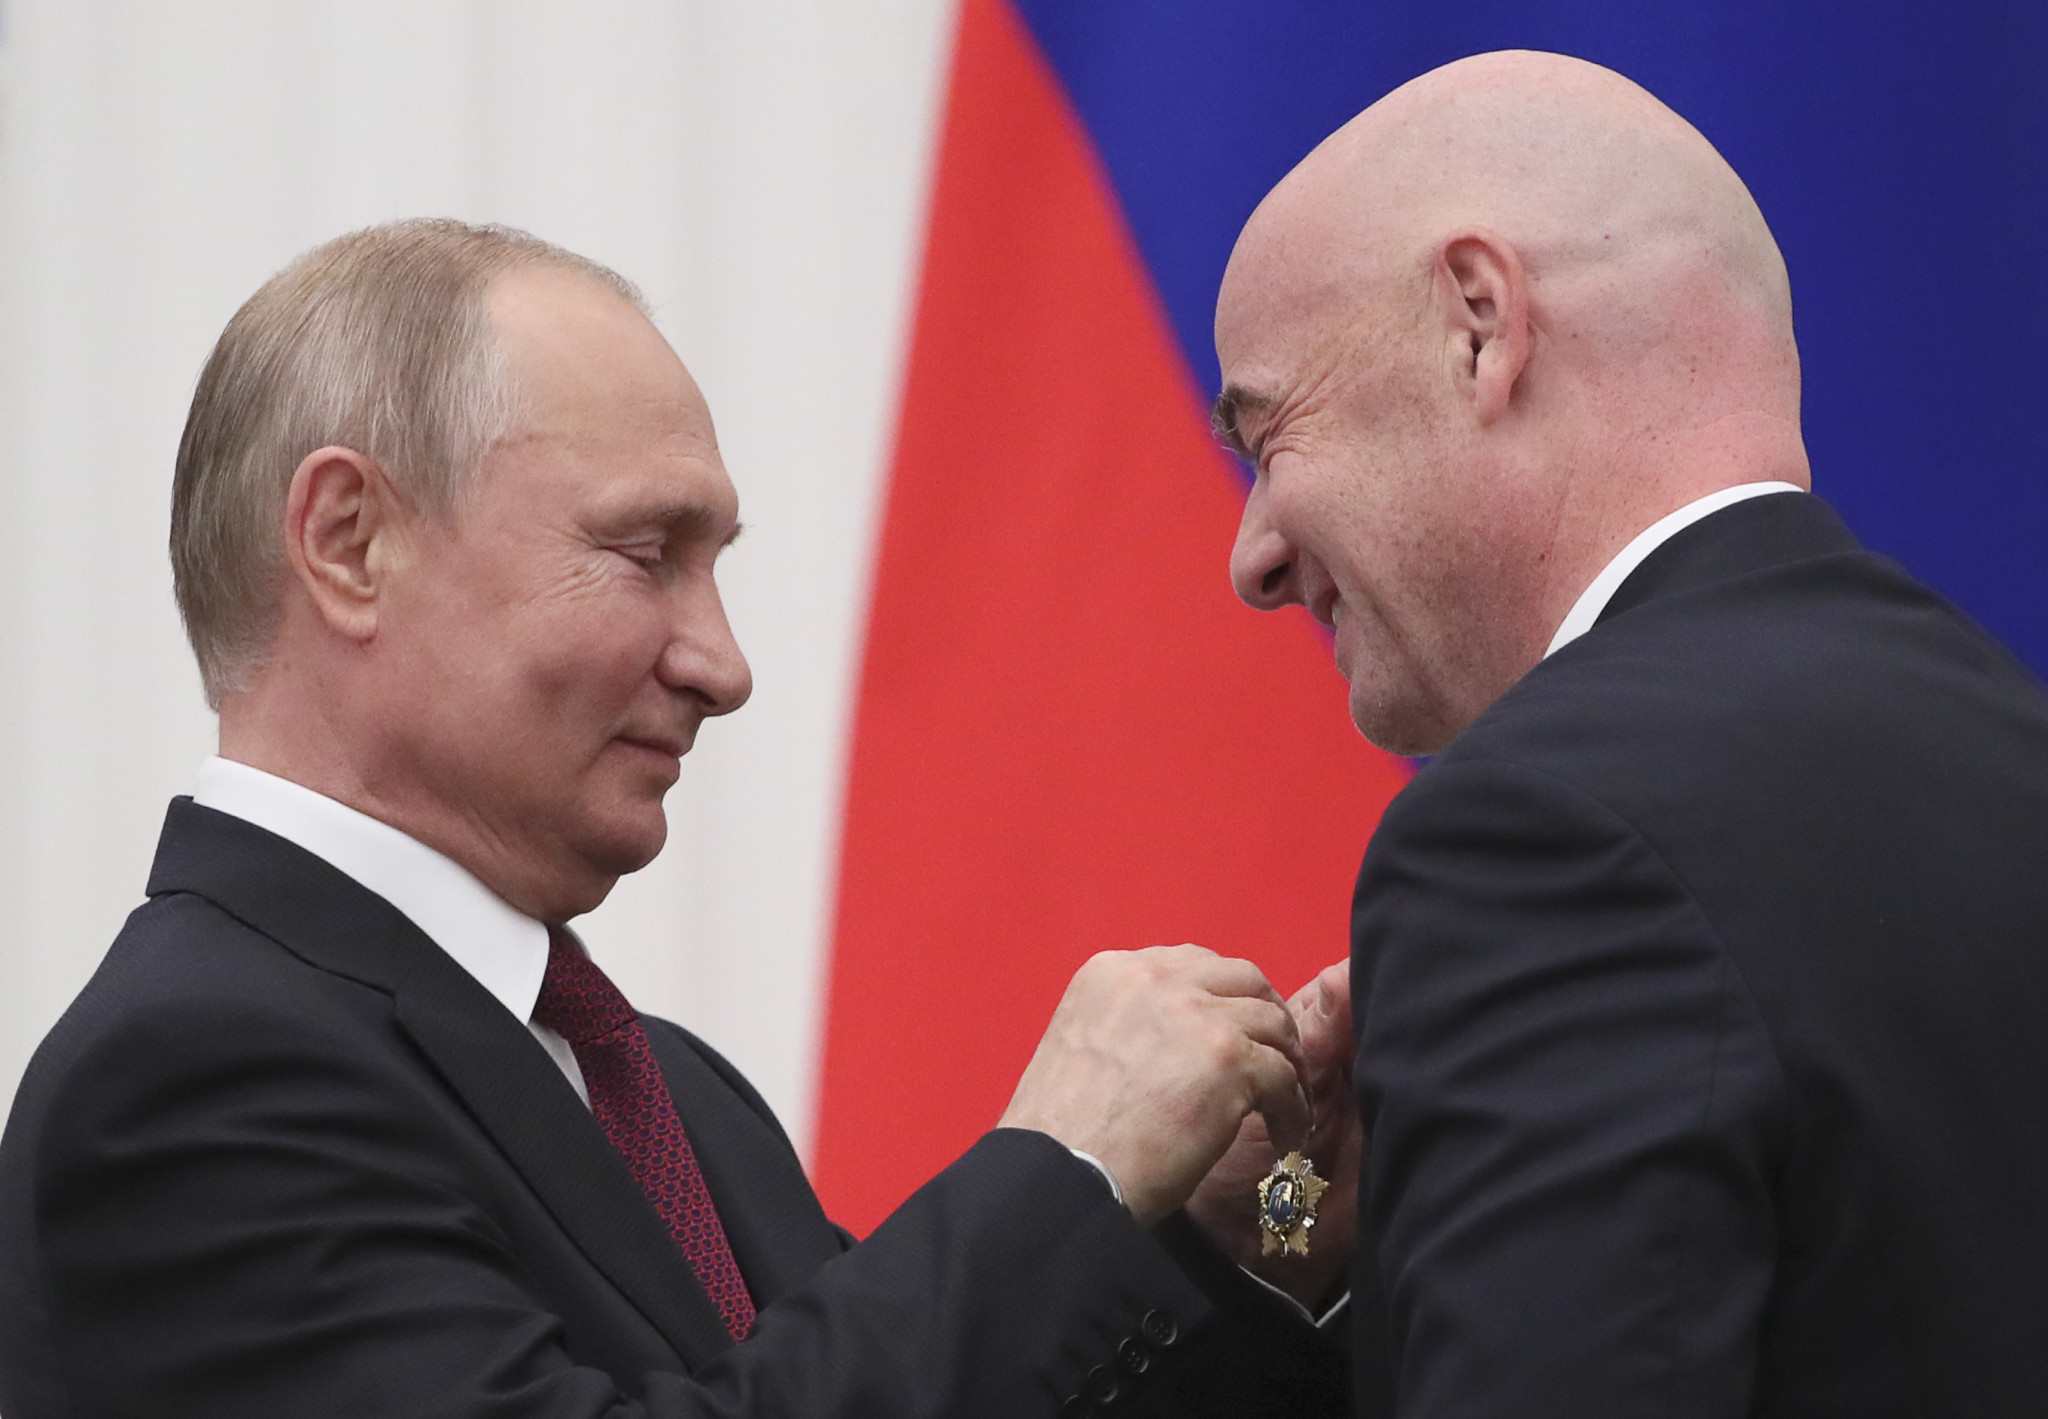 Russian President Vladimir Putin, left, awarded FIFA President Gianni Infantino, right, with an Order of Friendship after the 2018 World Cup ©Getty Images